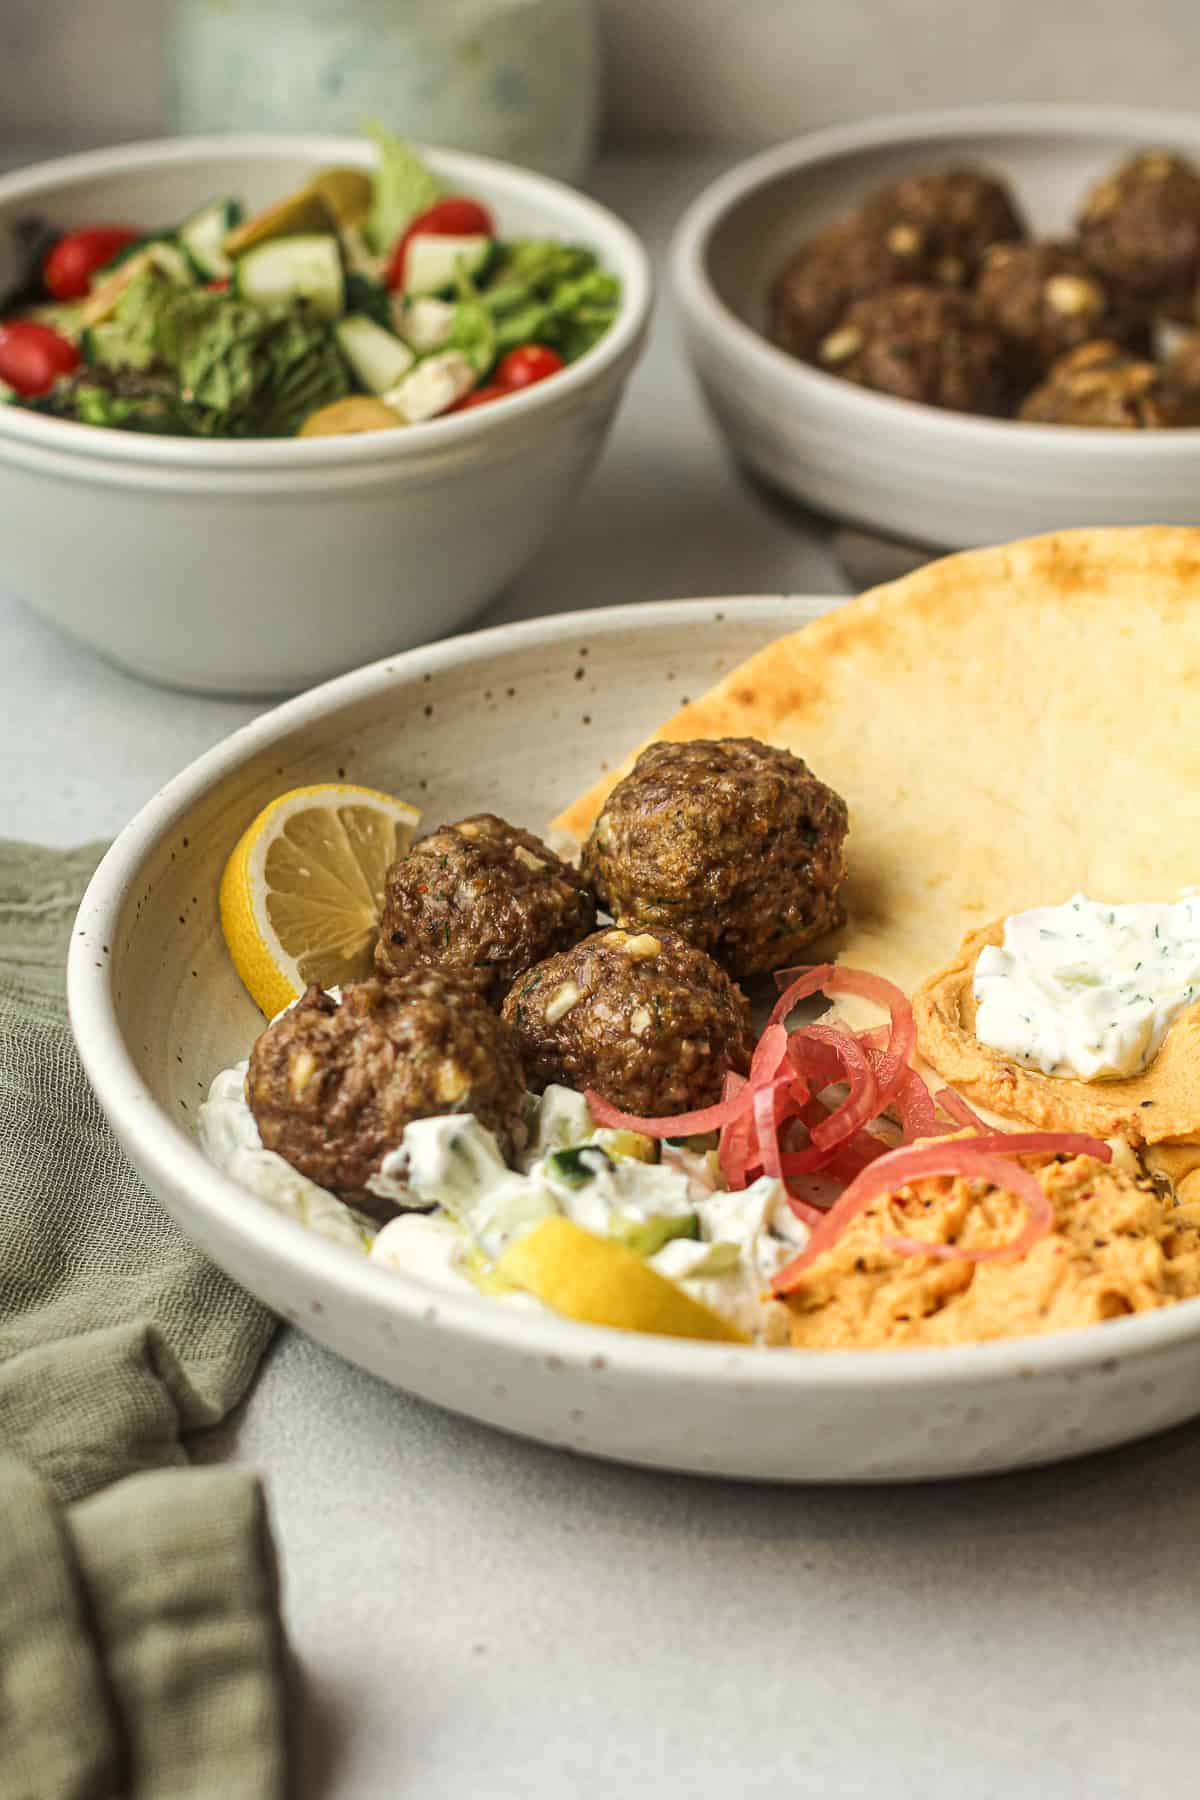 Side view of a bowl with naan, meatballs, tzatziki, and hummus - with a Greek salad in the background.